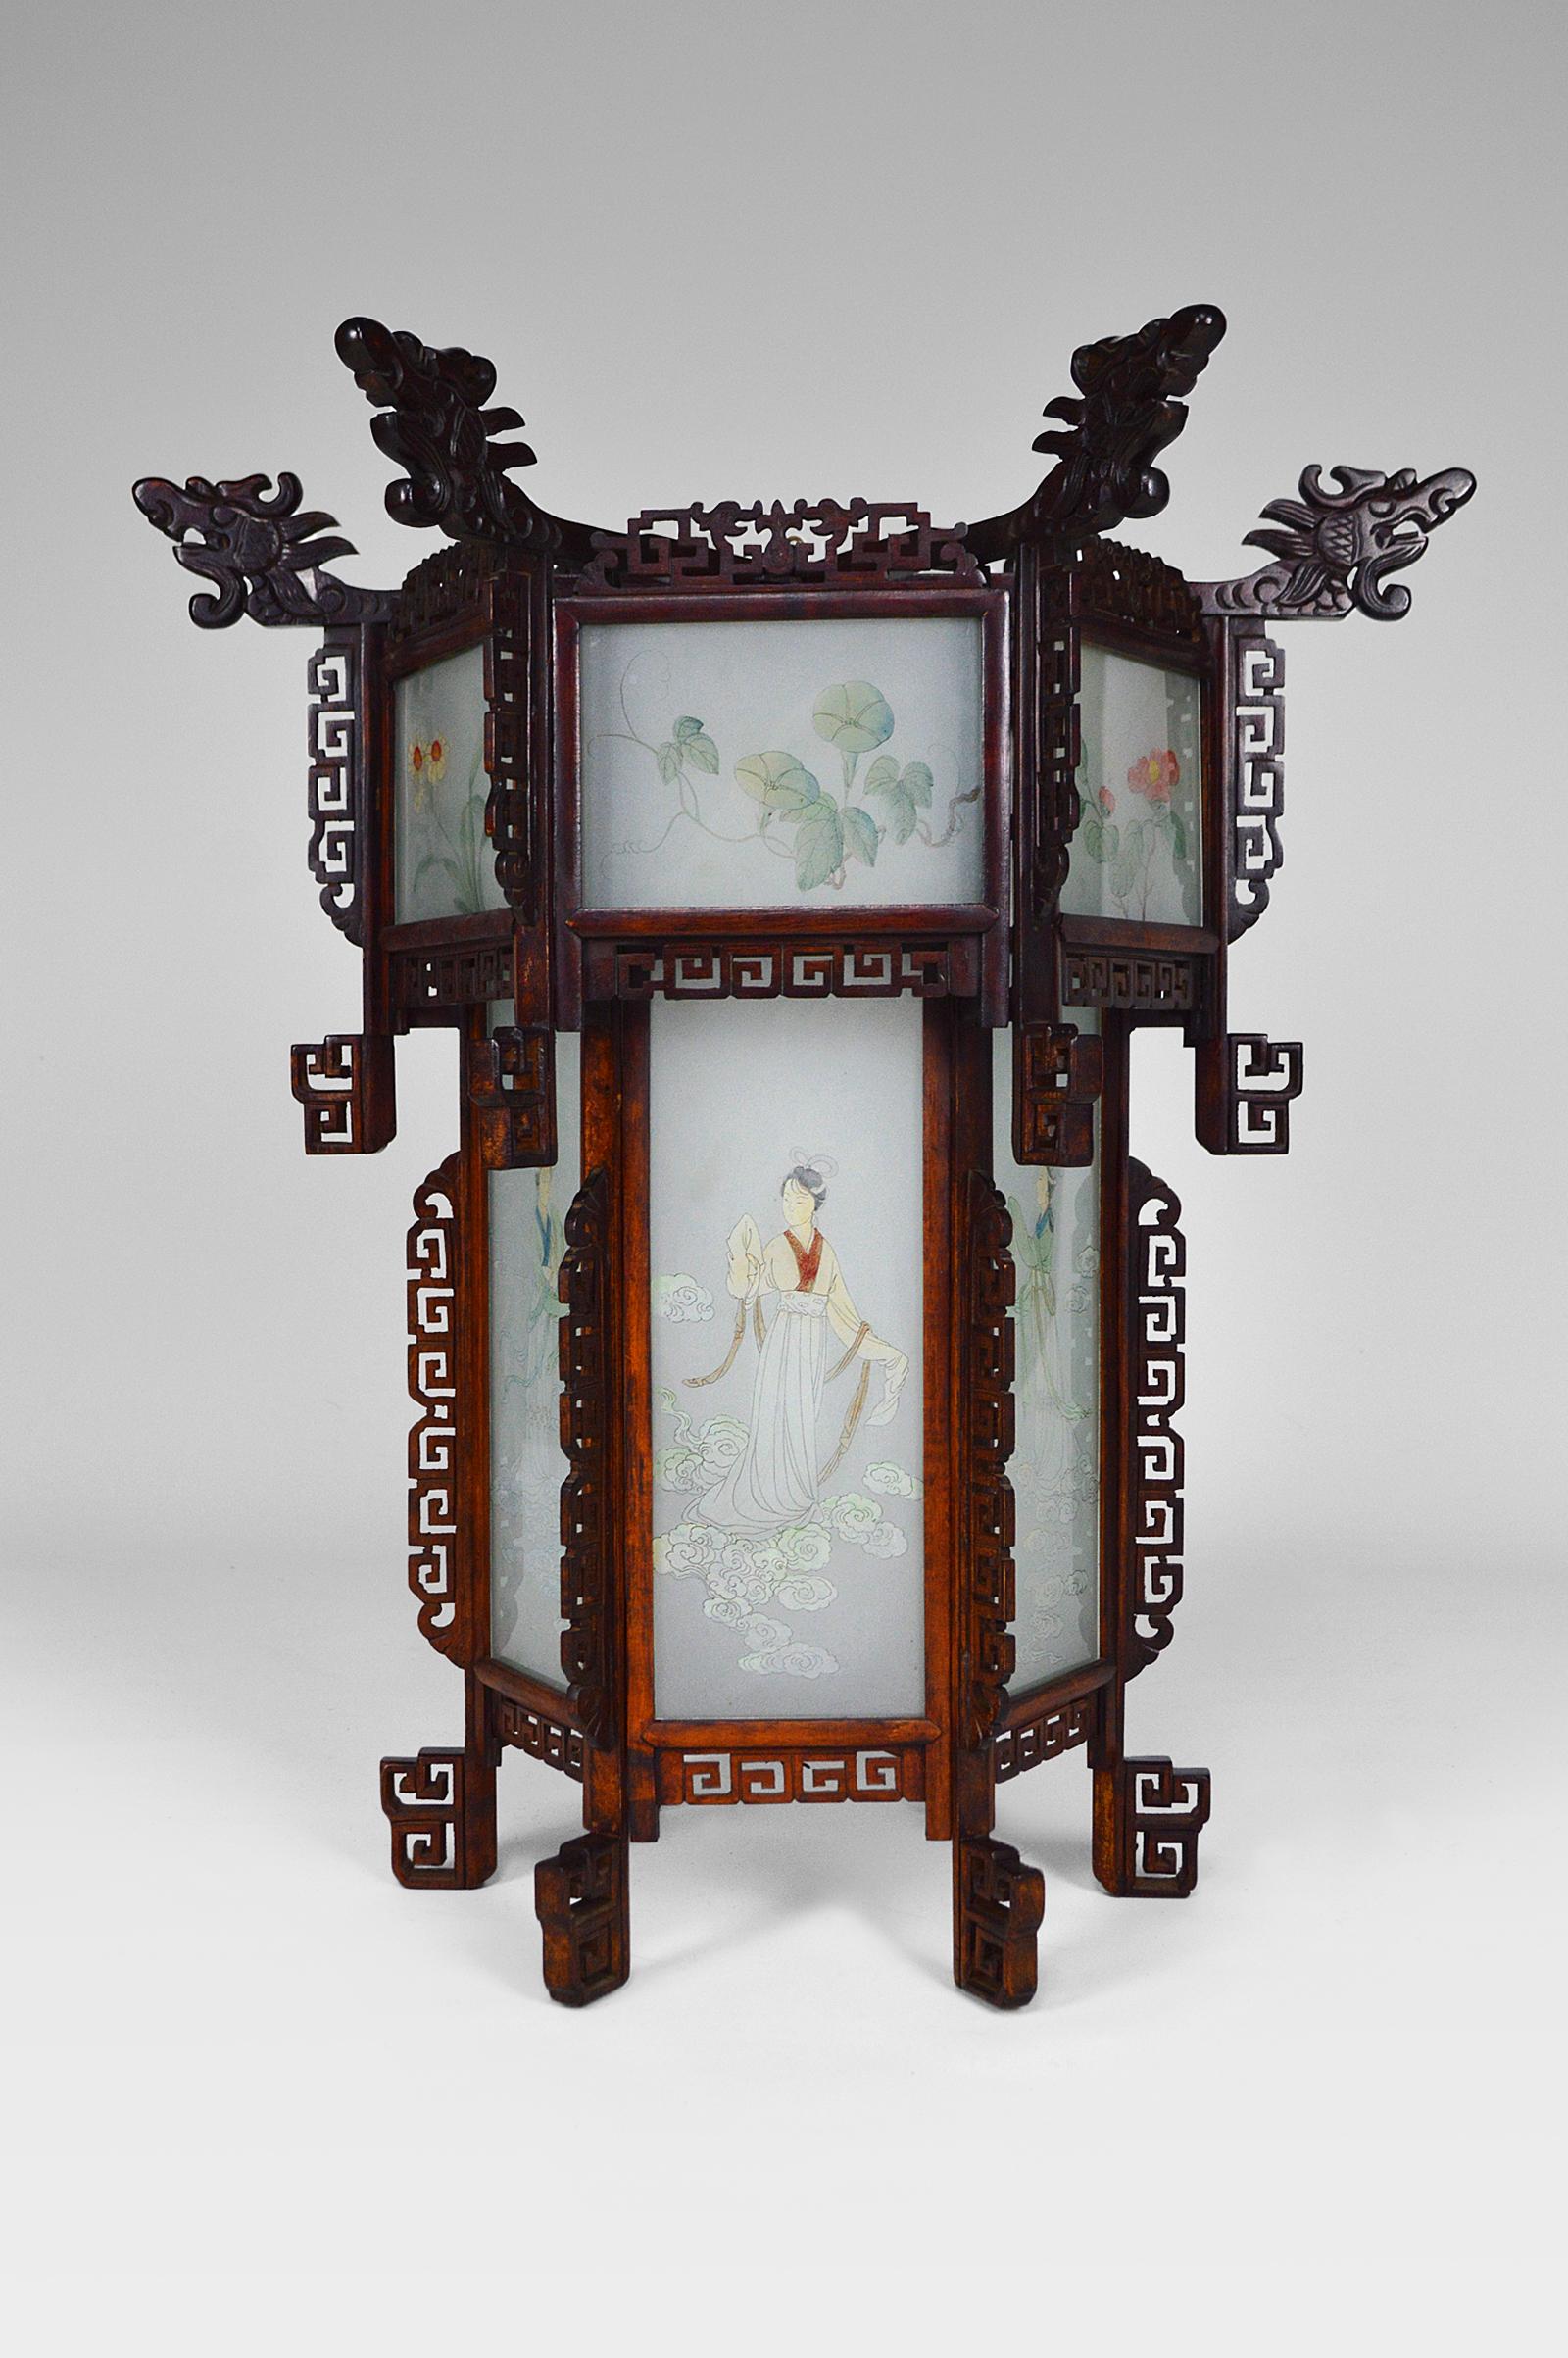 Superb large Asian lantern / chandelier / suspension.

Structure in solid wood carved with dragons and openwork. Glass plates painted with subjects of women and various flowers.

Asia, Southern China or former Indochina (Vietnam), circa